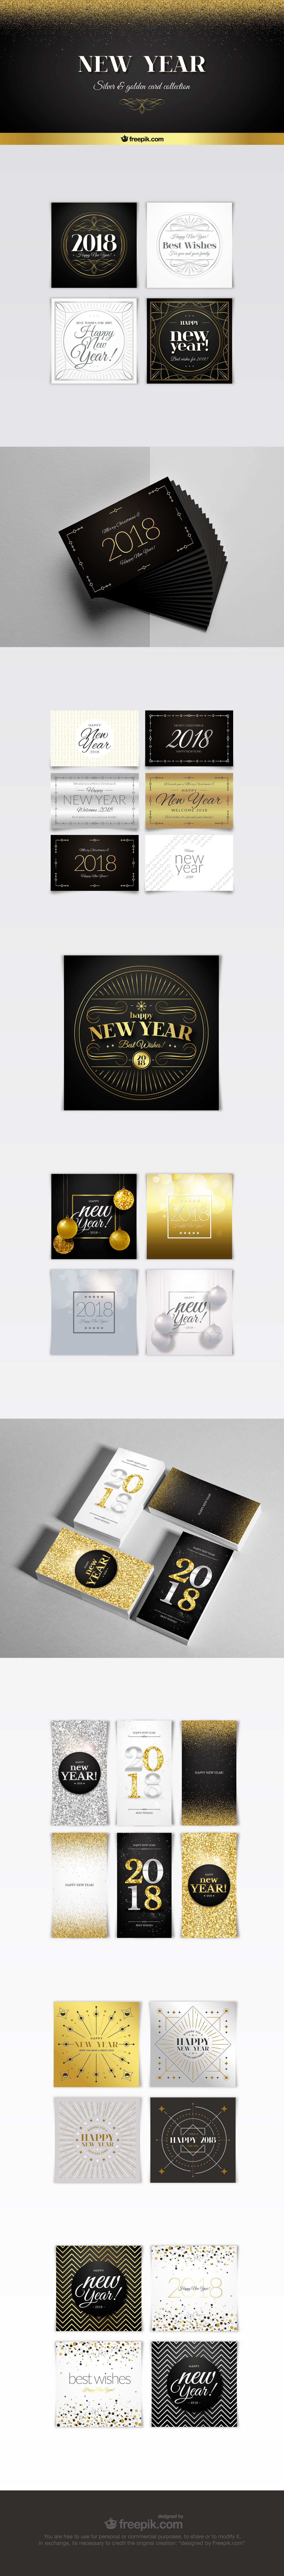 New Year Silver & Golden Card Collection free download